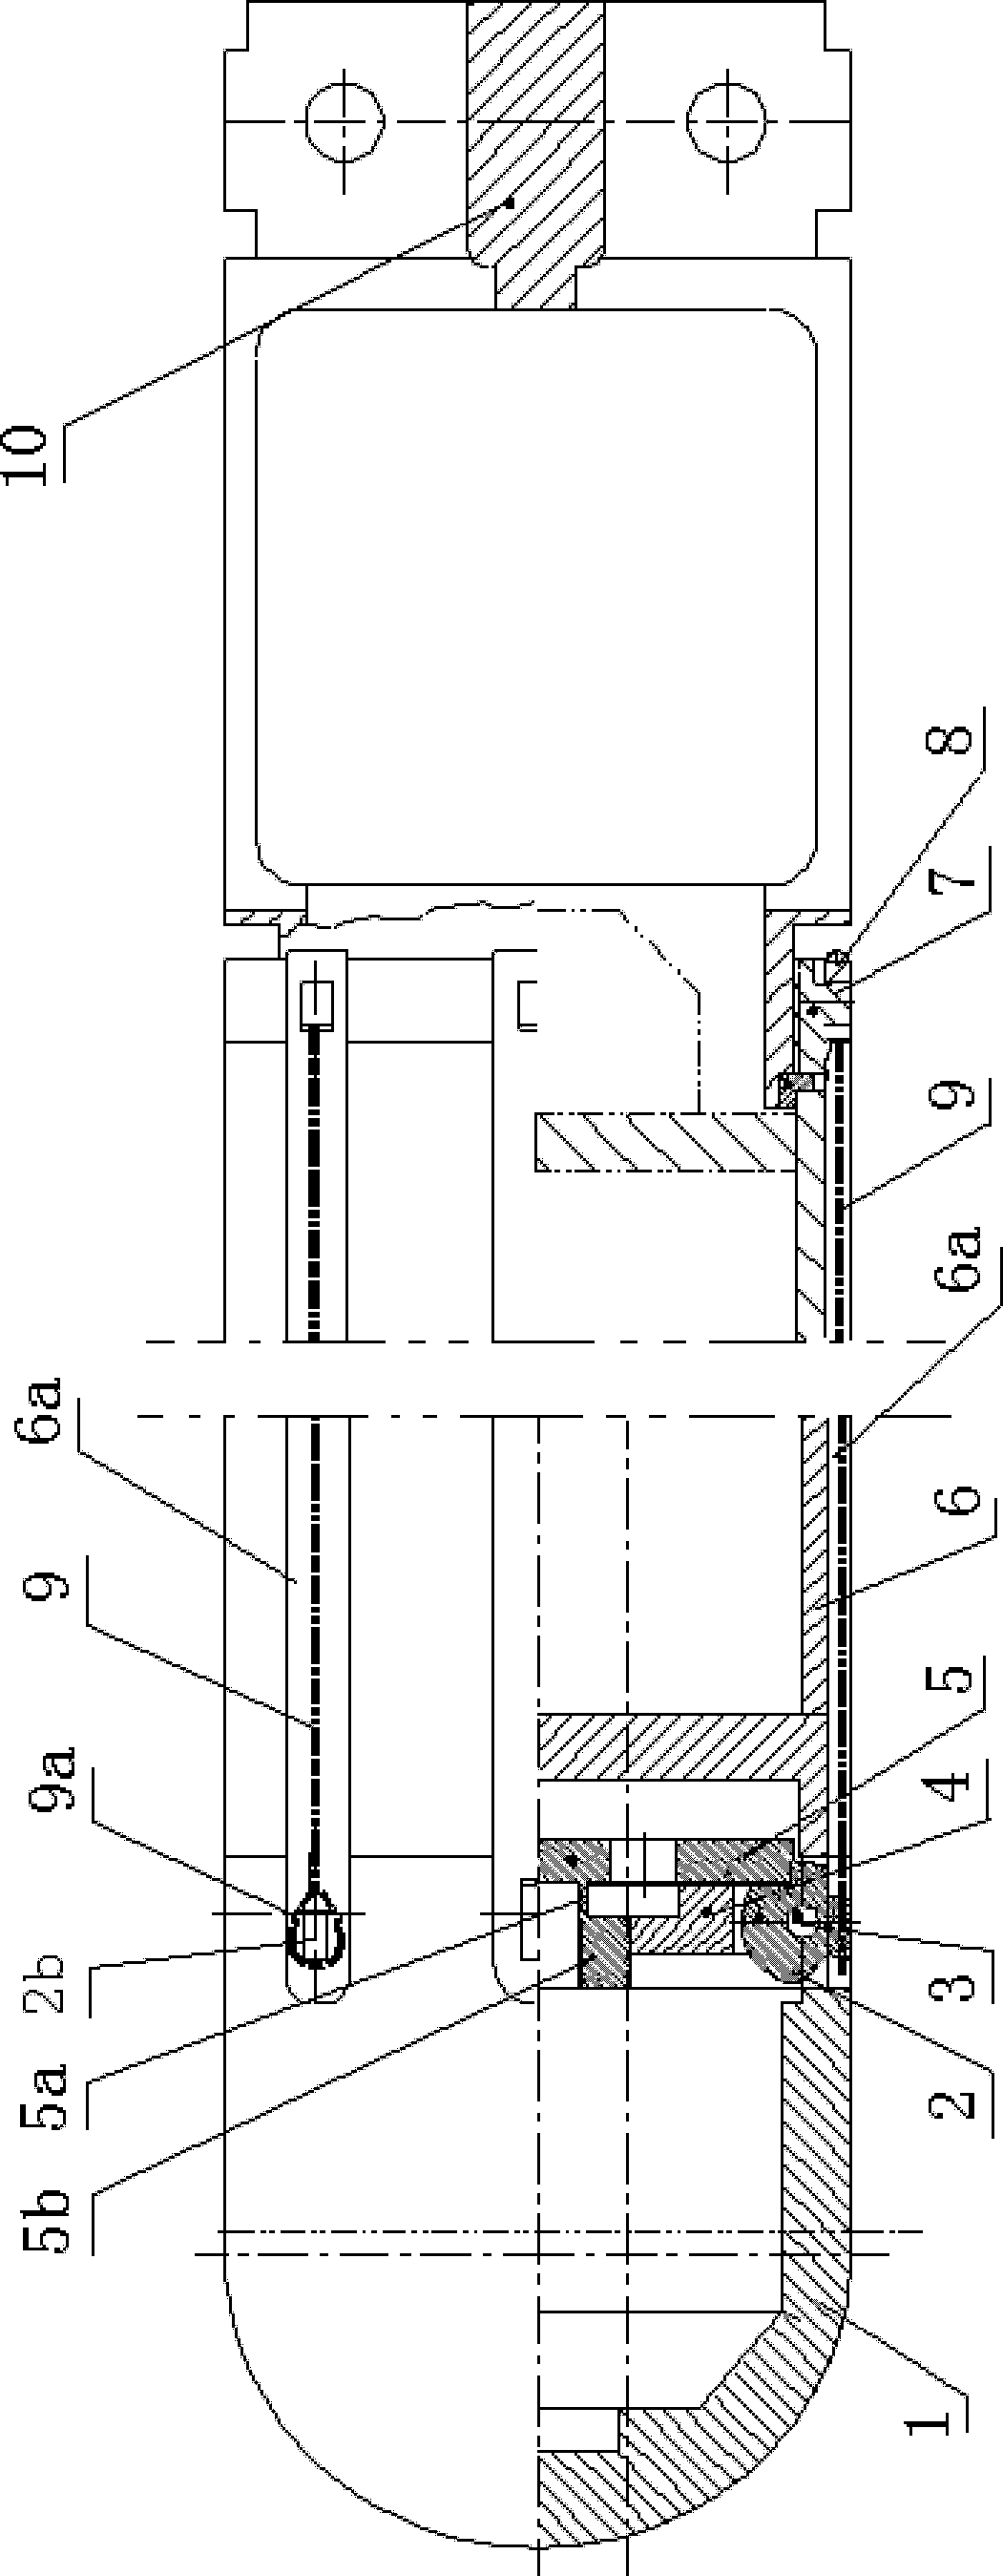 Bundled bullet release device with primary and secondary structure